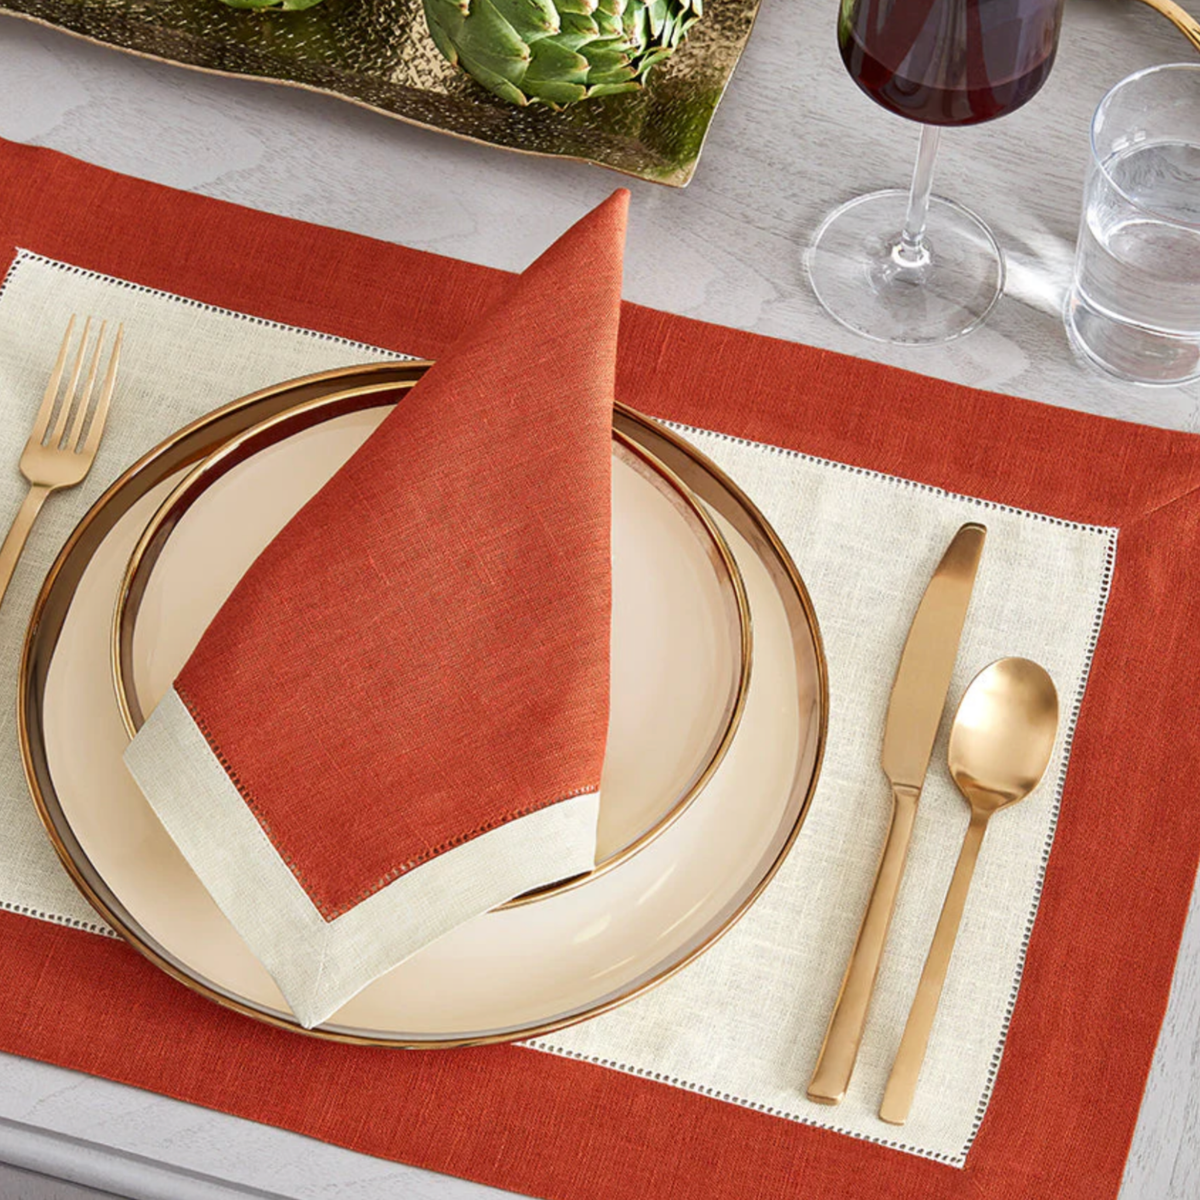 Table Arrangement Set with Sferra Roma Luxury Dinner Napkins and Placemats